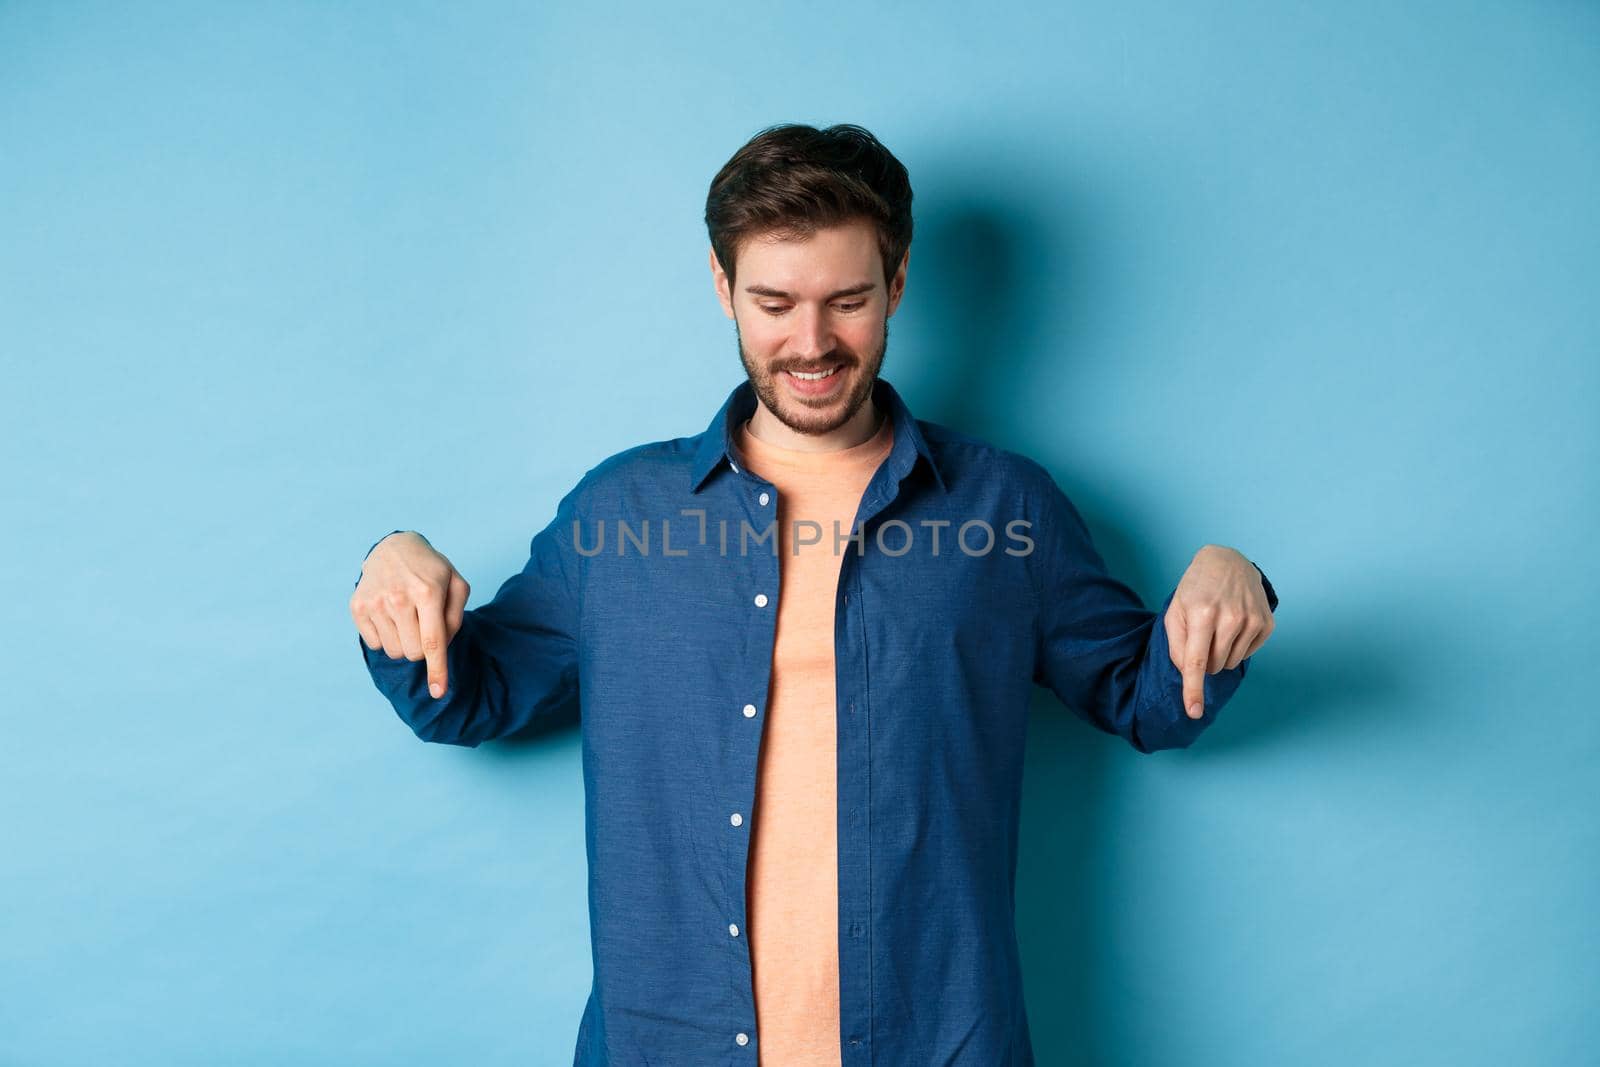 Smiling handsome man with beard, looking and pointing down at banner, checking out special offer, standing on blue background.